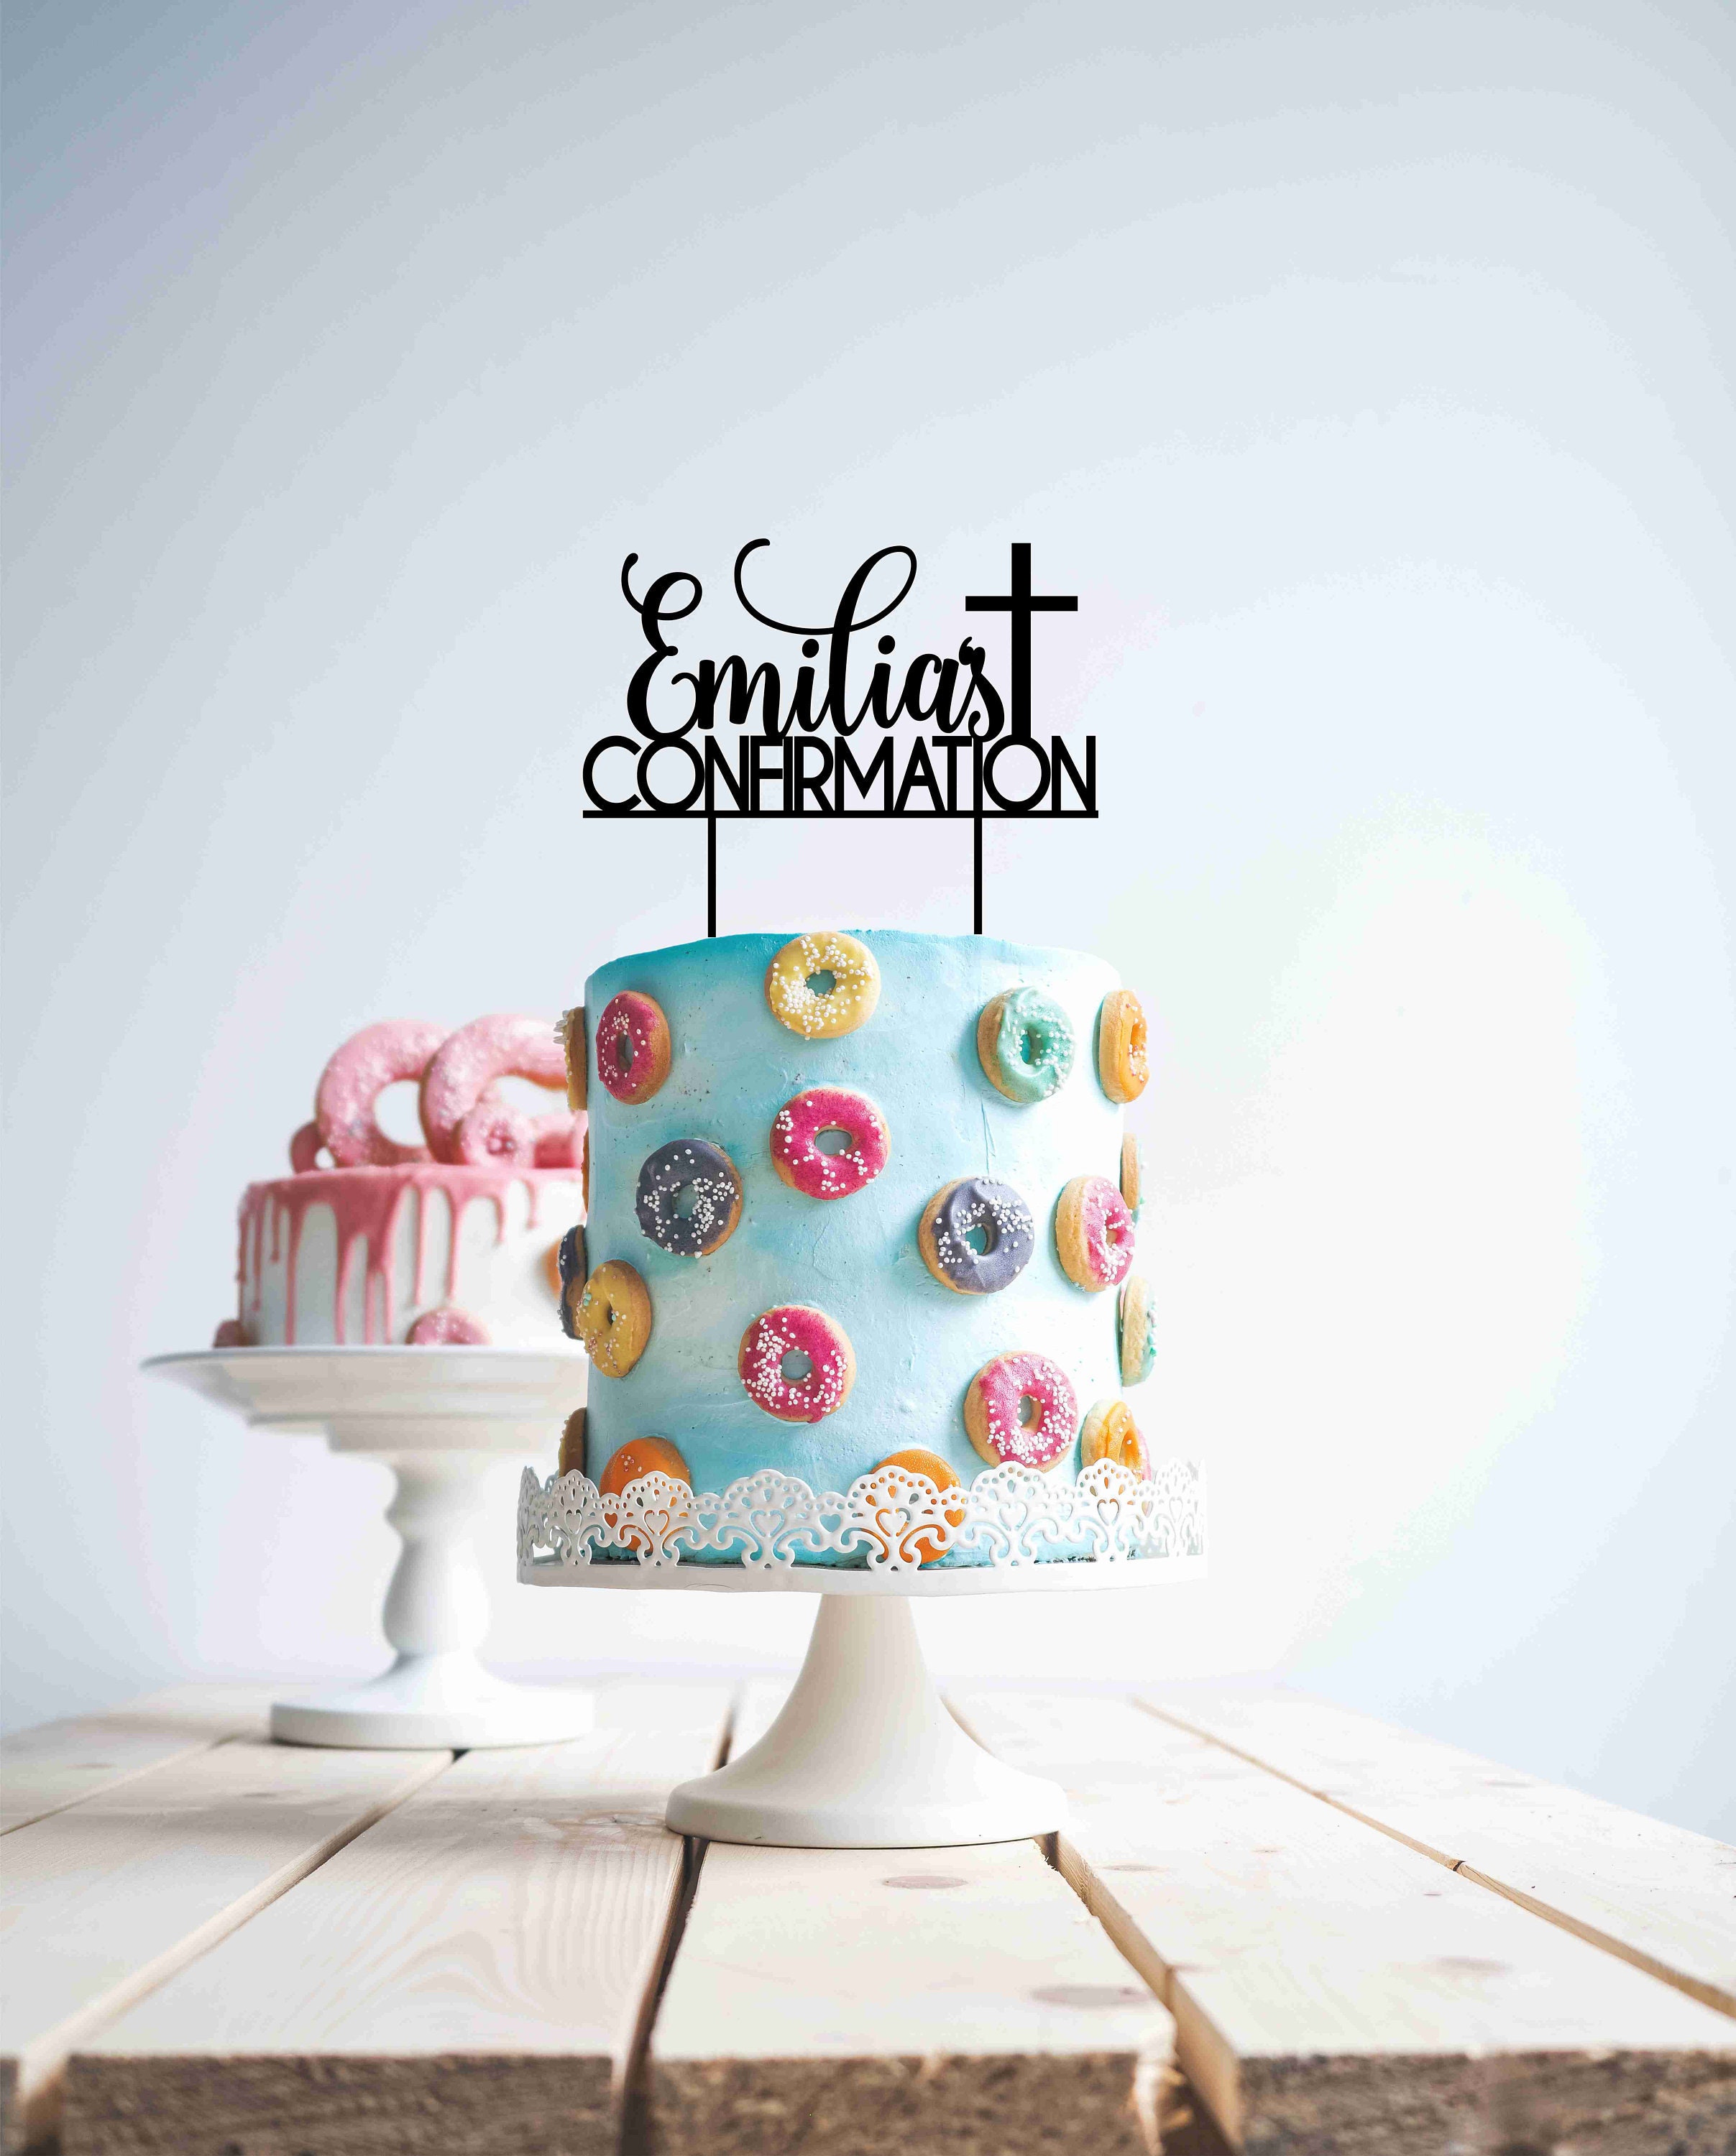 The Cutest Communion Cakes & Confirmation Cakes - Cake Geek Magazine